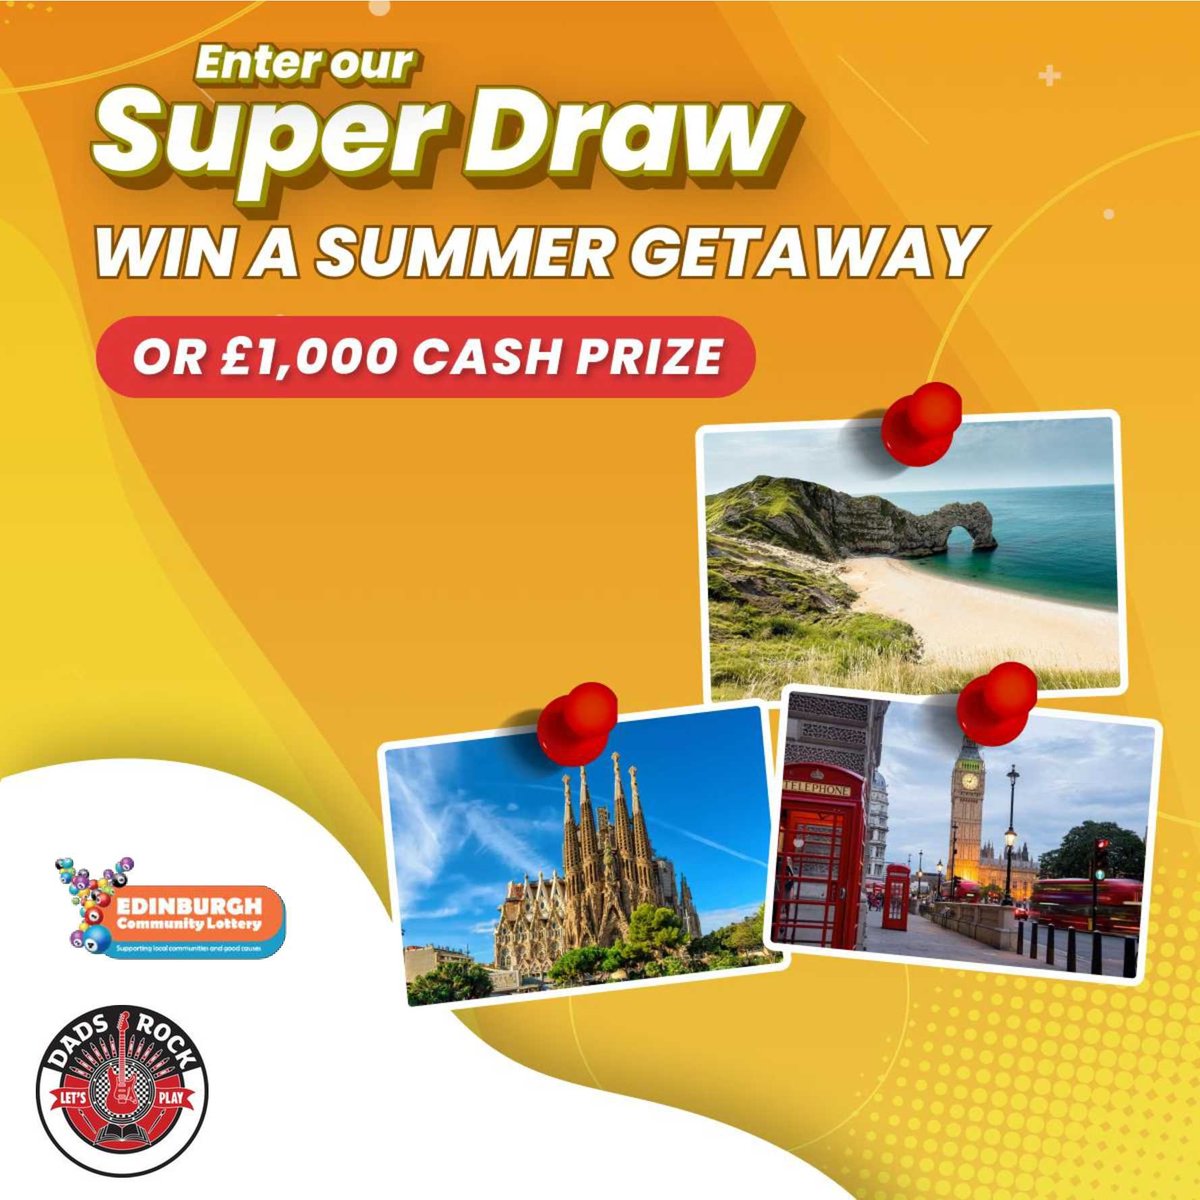 Win big on May 25th! Get a chance to win a £1,000 holiday voucher or take the cash alternative. Whether it's a dream getaway or a luxury treat, the choice is yours! Enter the Edinburgh Community Lottery here for just £1 per ticket👉 lght.ly/35jiag7